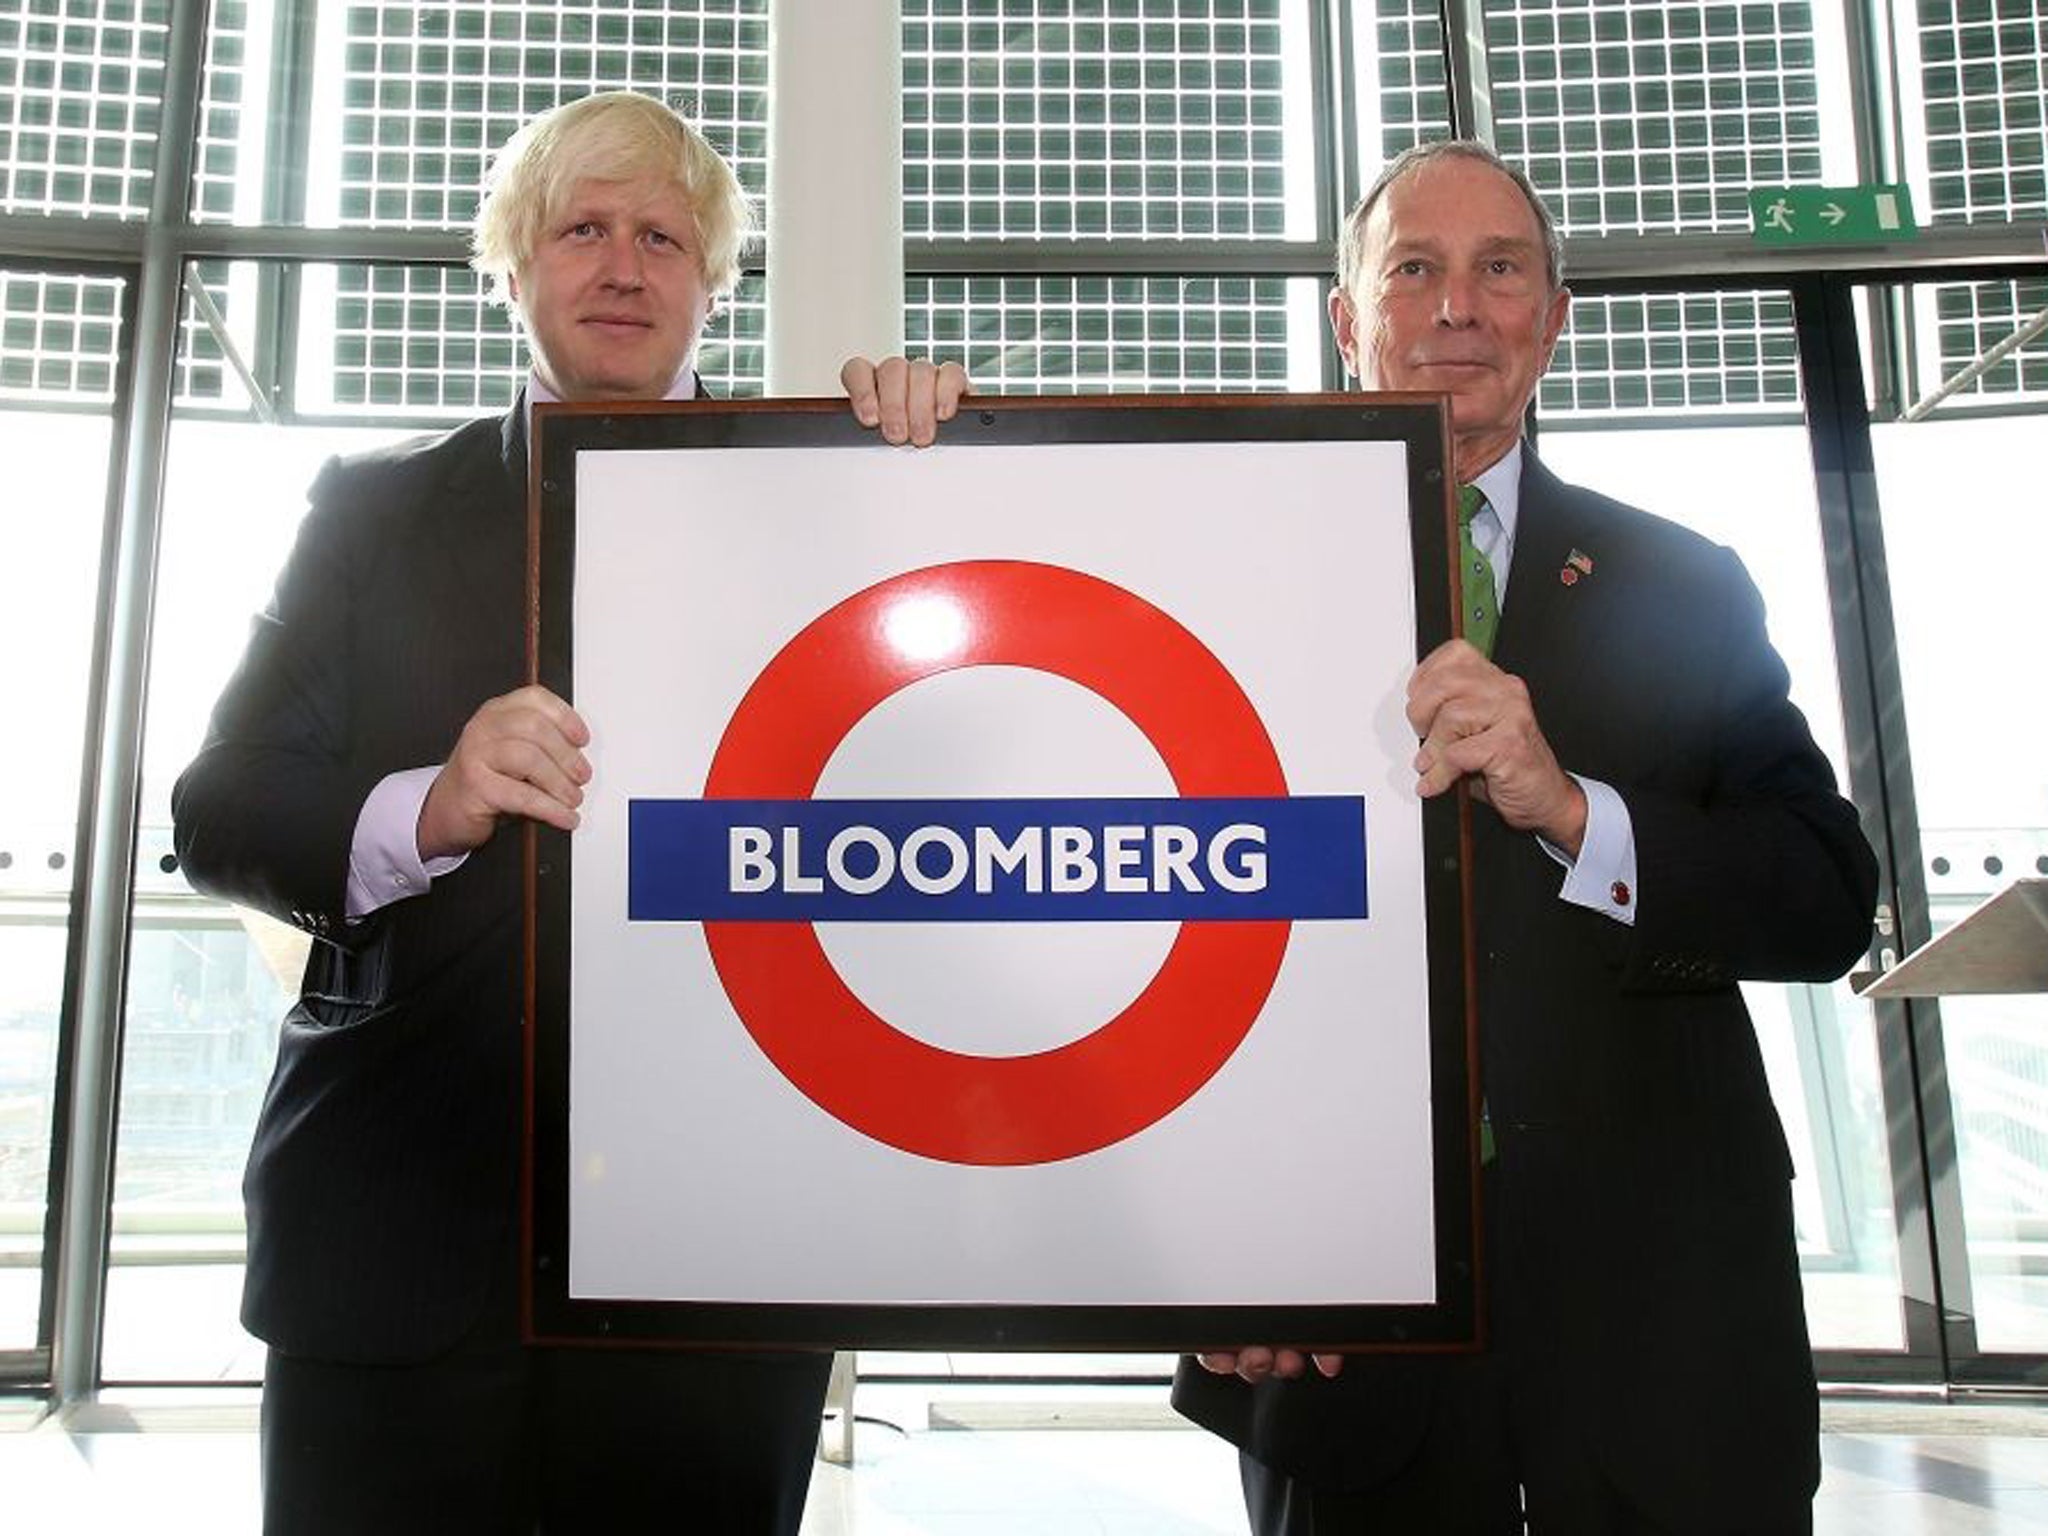 Boris Johnson (left) the Mayor of London and Michael Bloomberg, the Mayor of New York, at the launch of the Mayors Challenge in Europe at City Hall in London